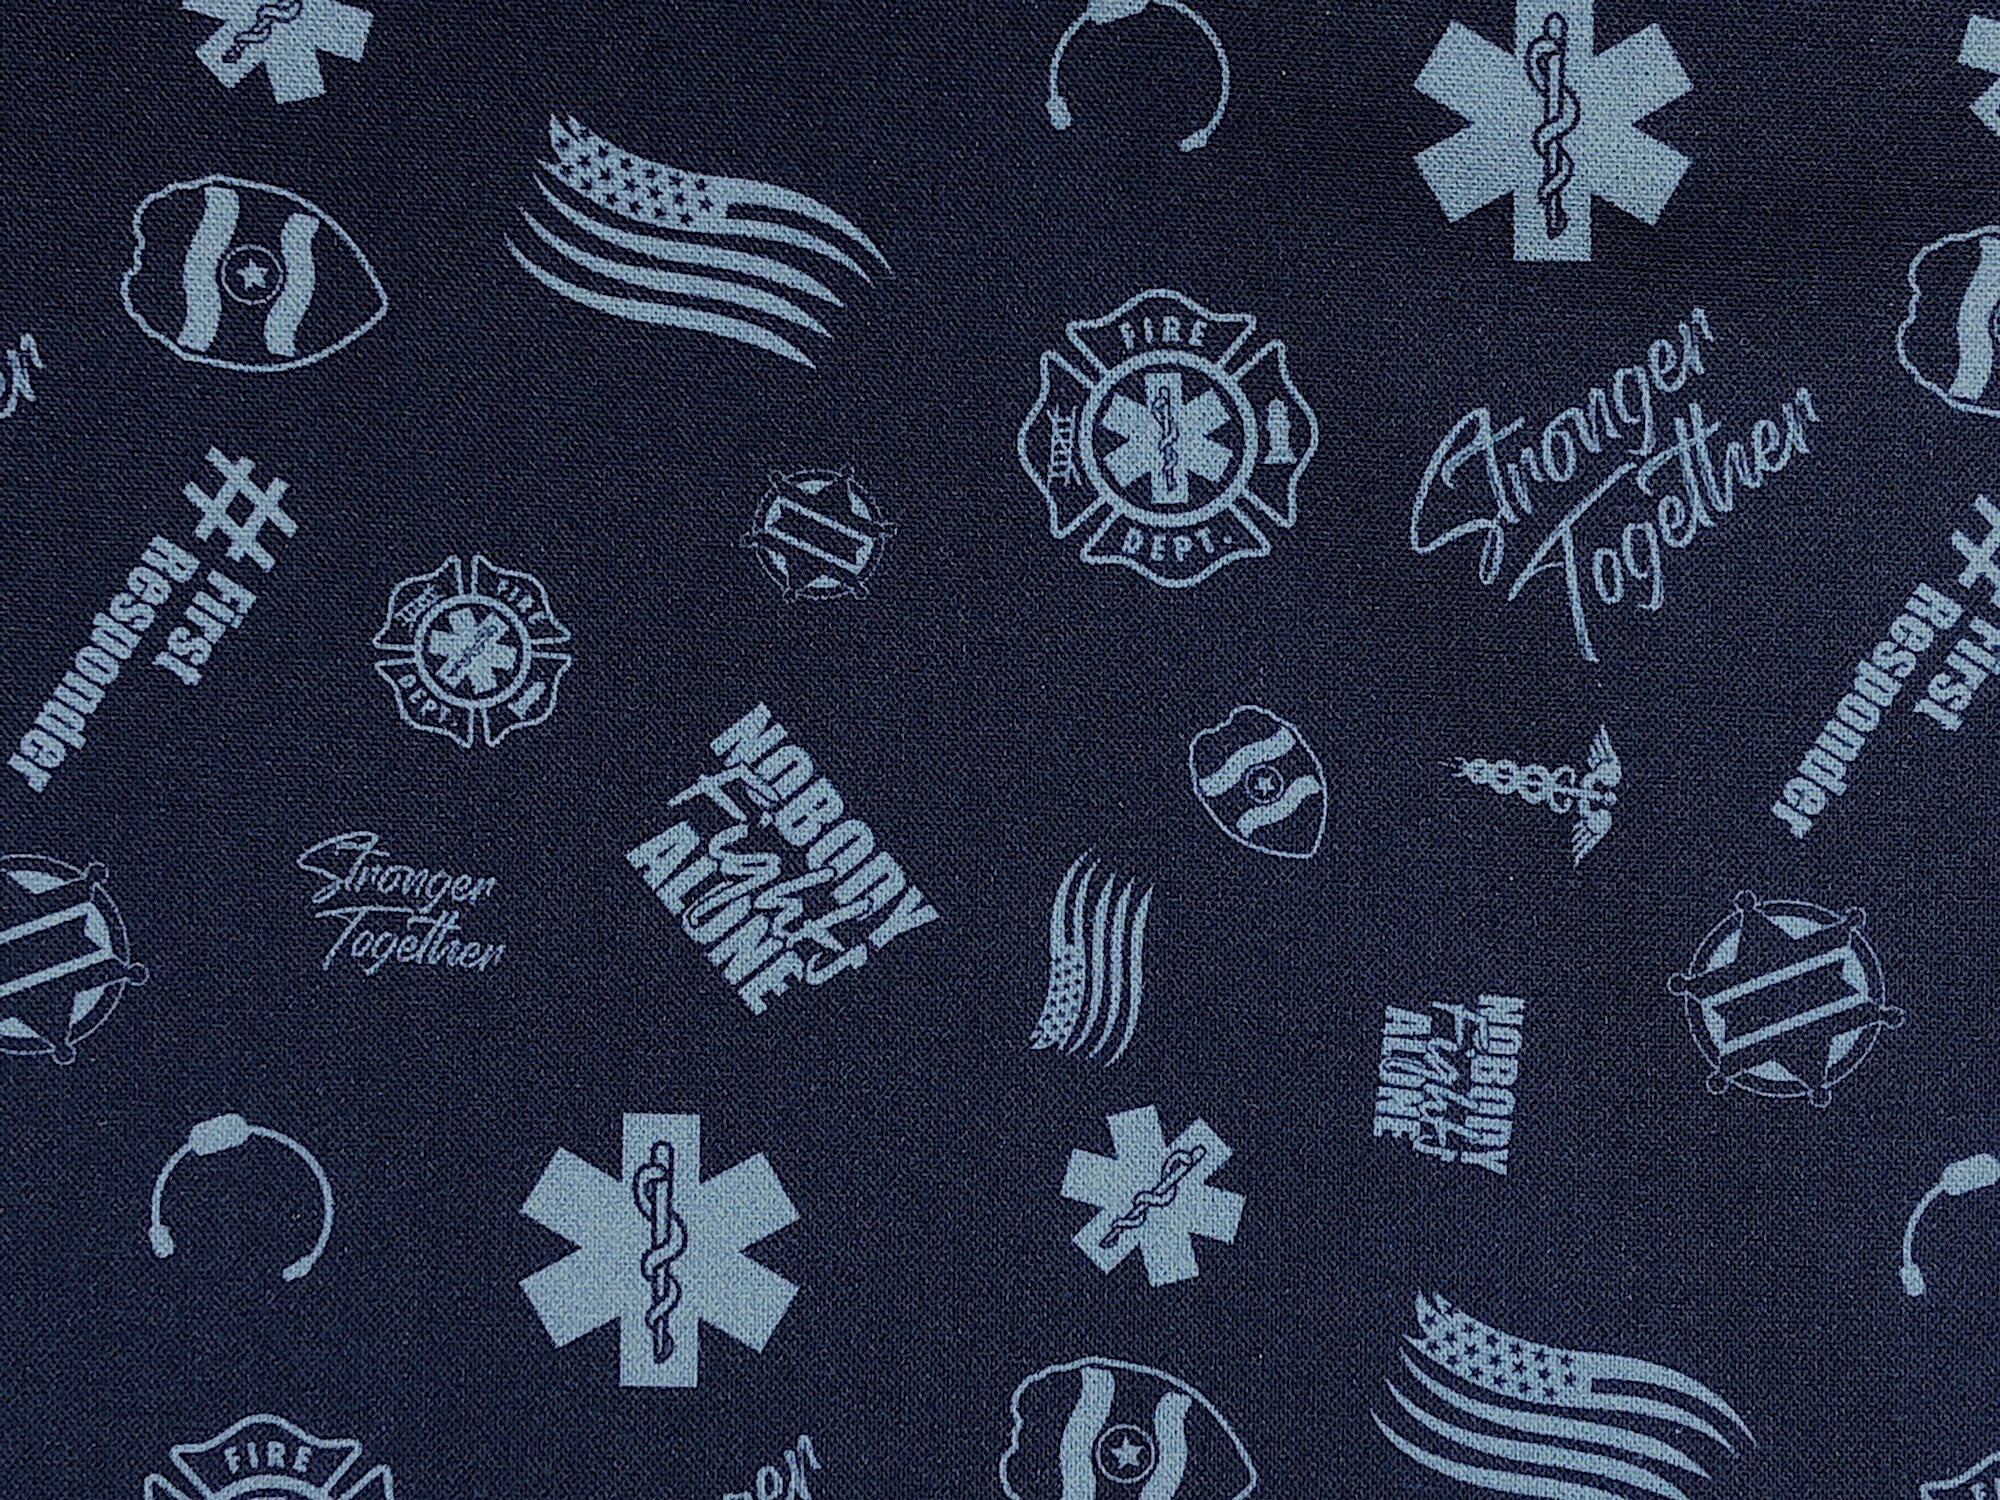 Blue cotton fabric covered with first responder insignias'.